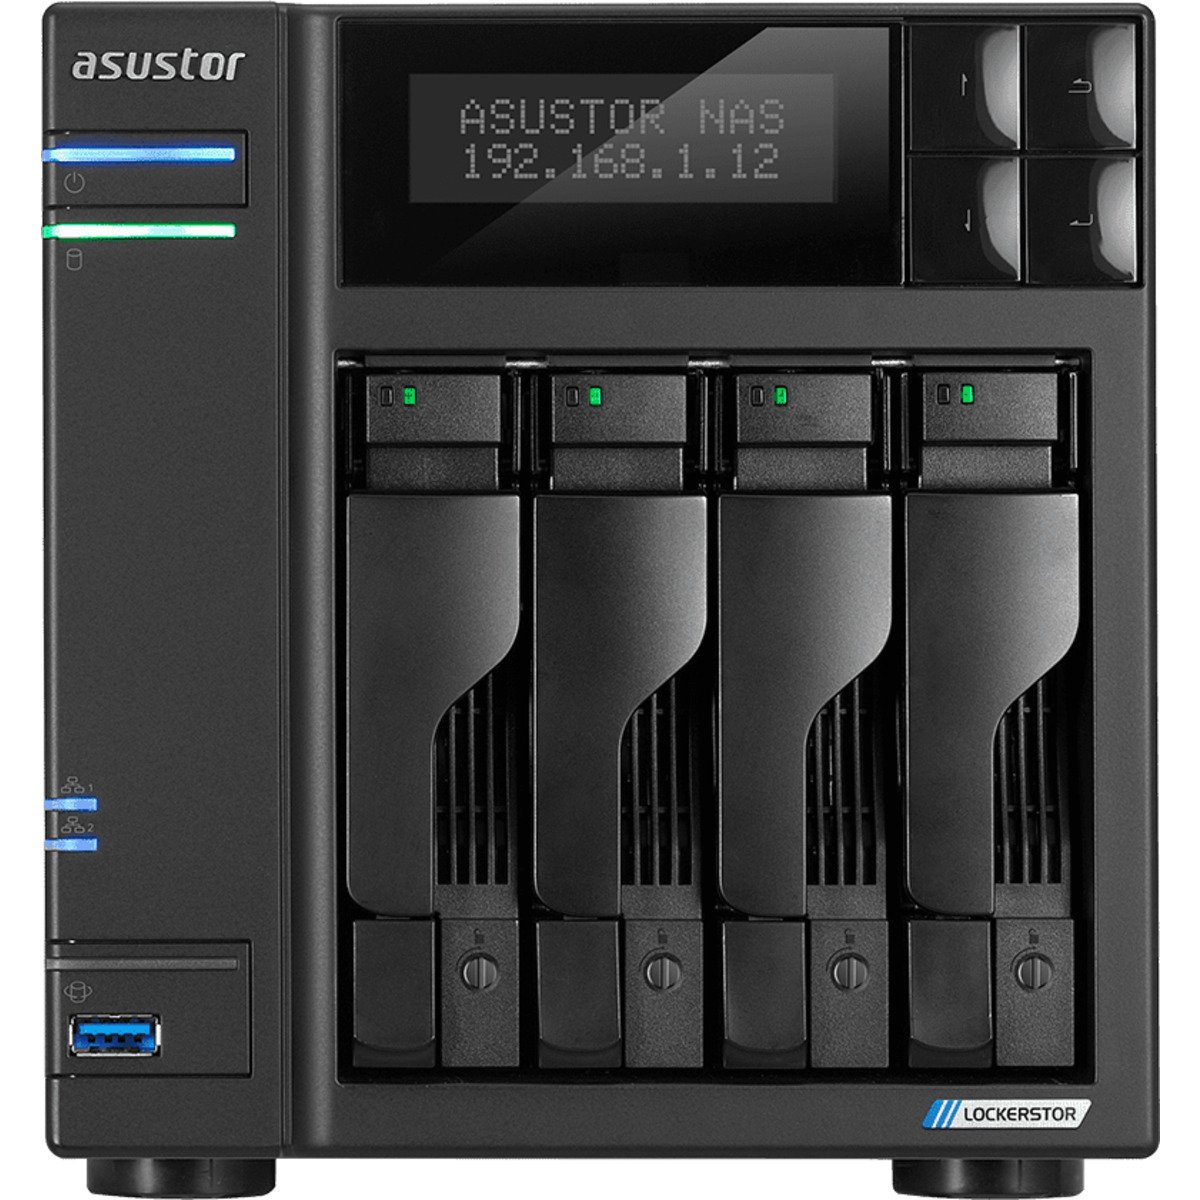 ASUSTOR AS6604T Lockerstor 4 24tb 4-Bay Desktop Multimedia / Power User / Business NAS - Network Attached Storage Device 4x6tb Seagate IronWolf ST6000VN006 3.5 5400rpm SATA 6Gb/s HDD NAS Class Drives Installed - Burn-In Tested - FREE RAM UPGRADE AS6604T Lockerstor 4